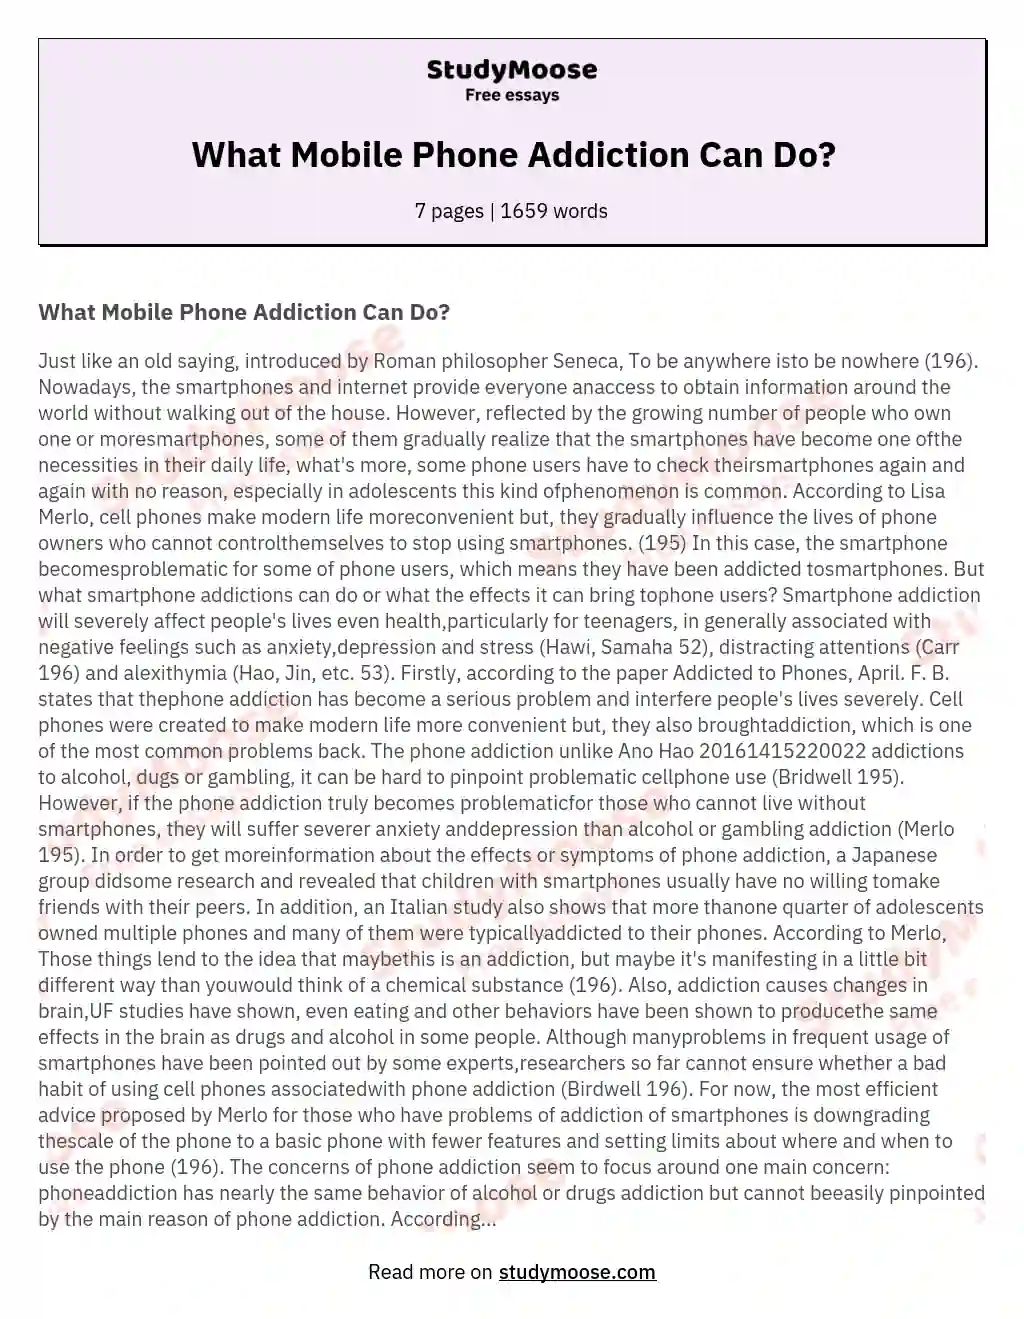 What Mobile Phone Addiction Can Do?